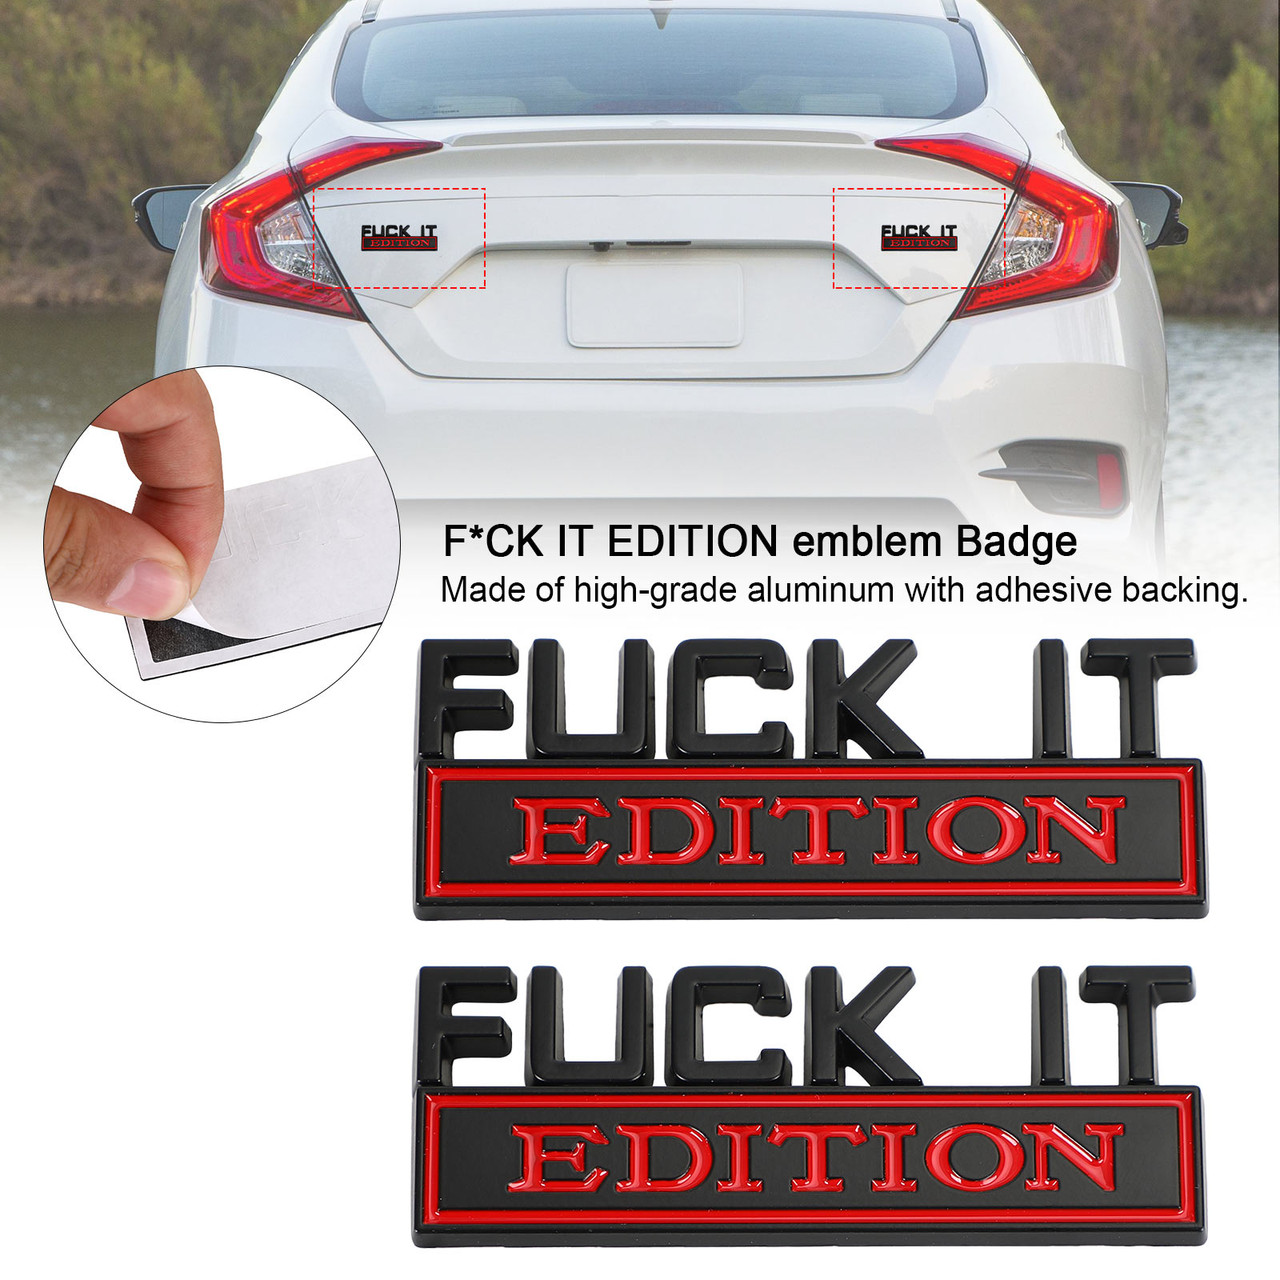 2pc F*CK IT EDITION Car emblem Badges for Chevy Honda Toyota Ford Black/Red